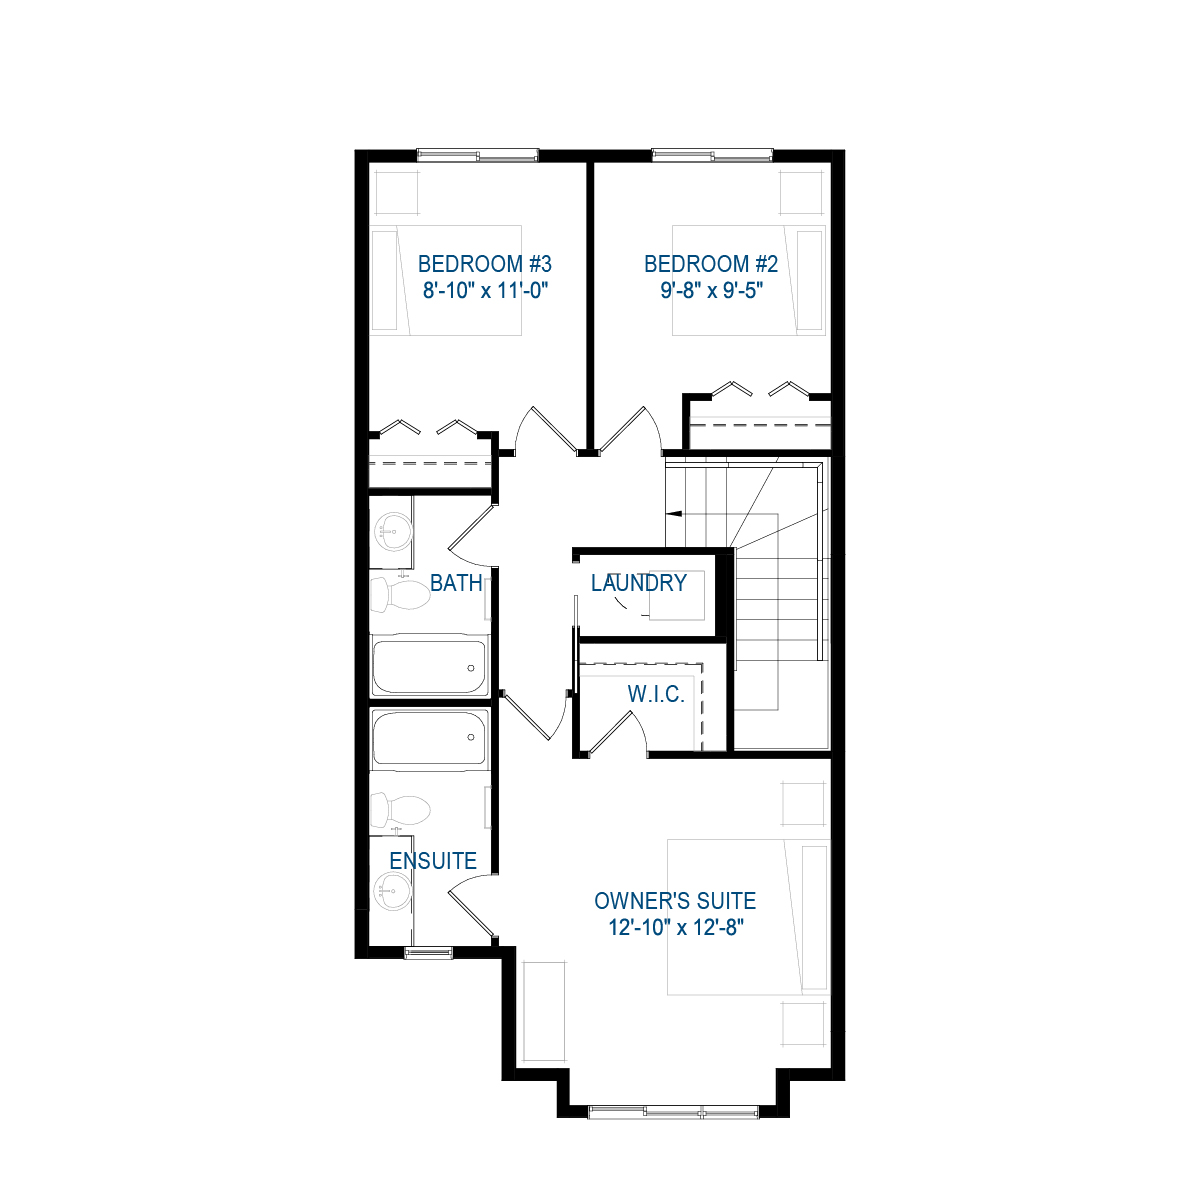  487 Edgemont Drive NW  Floor Plan of Edgemont with undefined beds